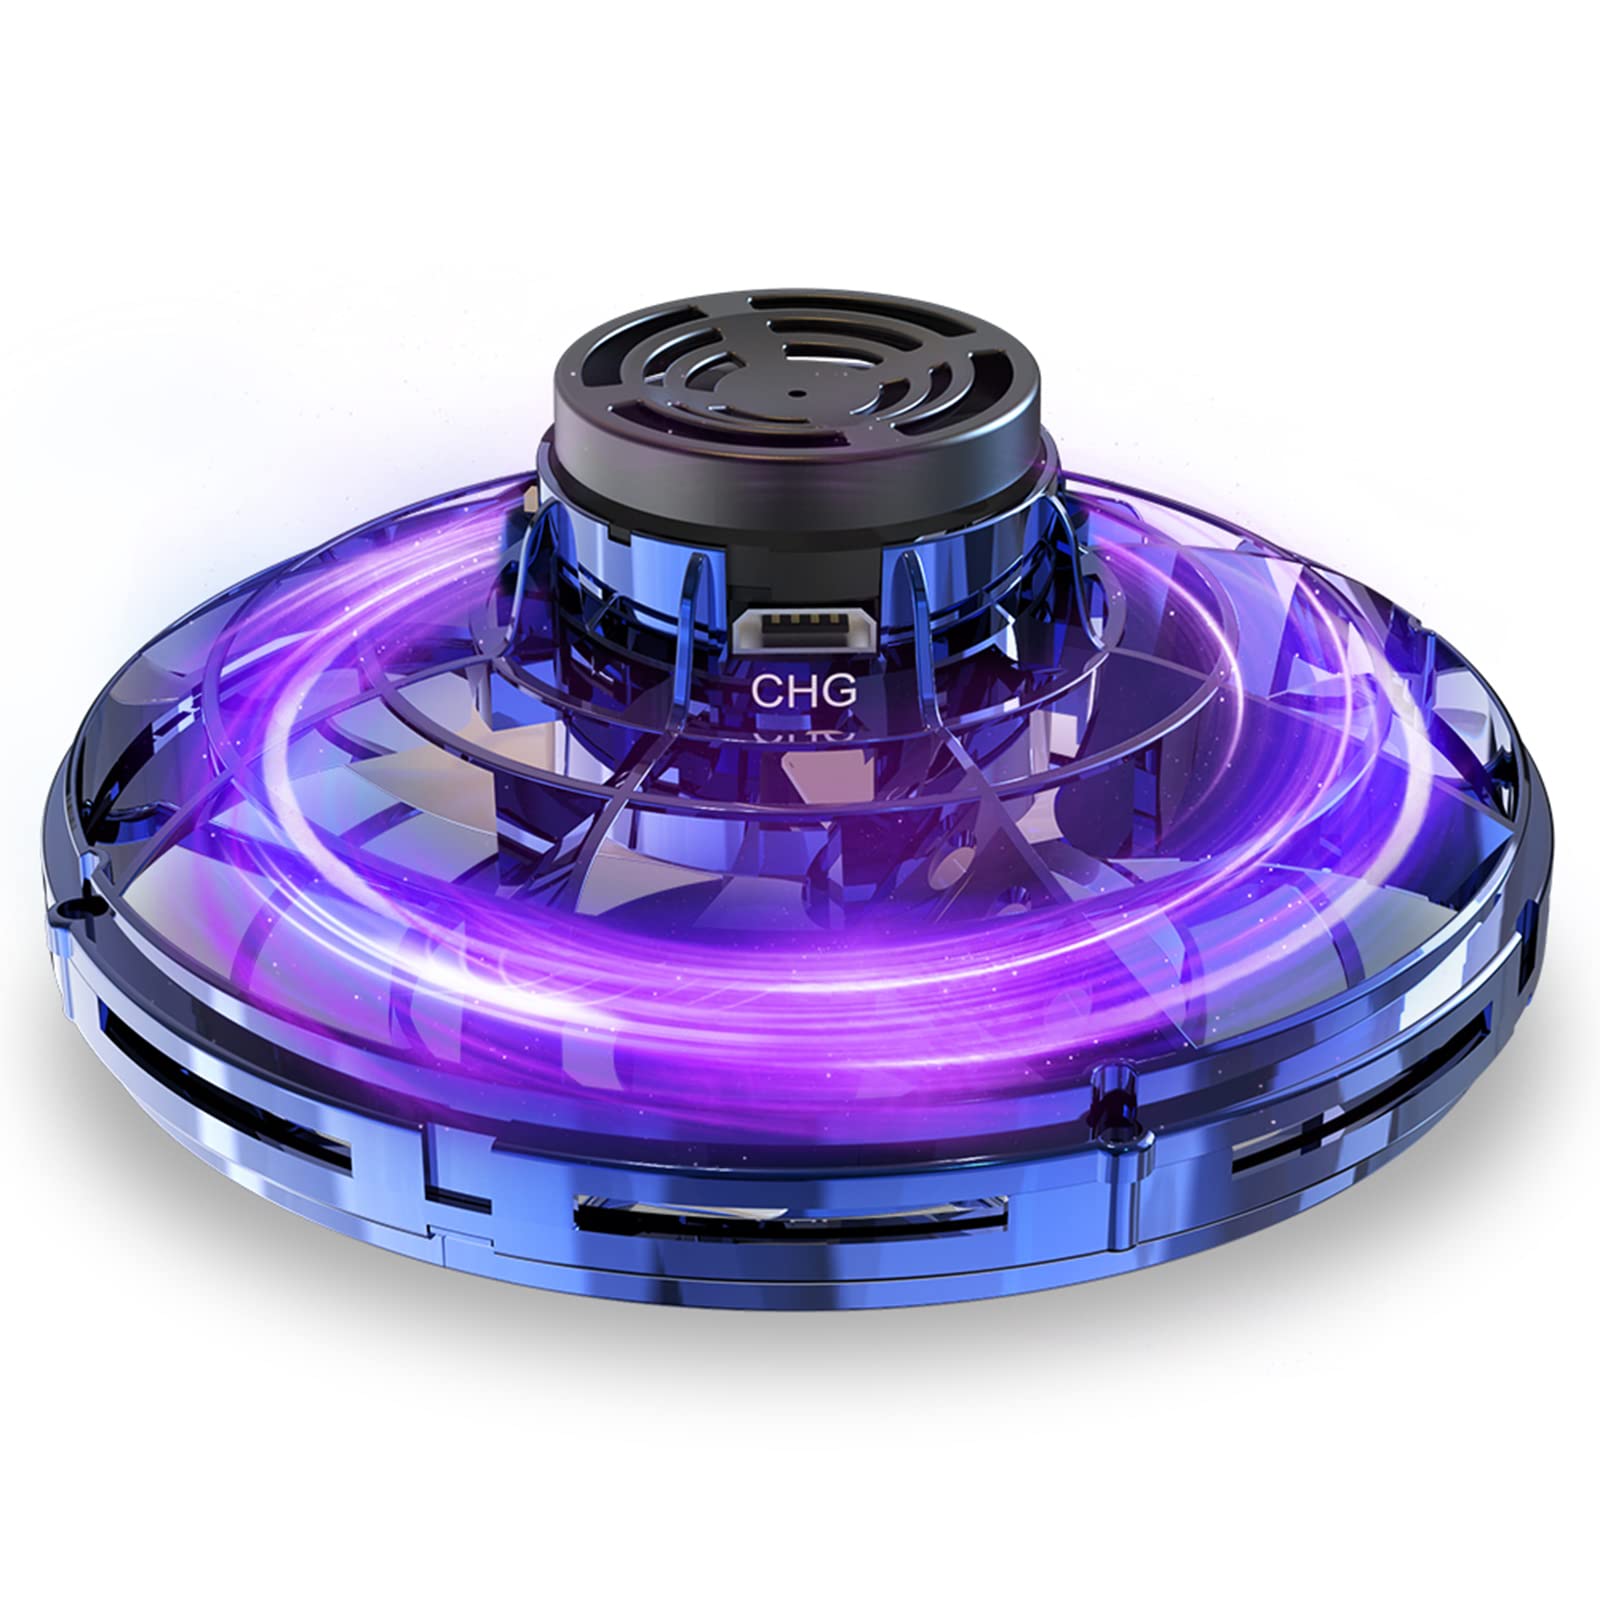 Flying Spinner Mini UFO Drone for Kids, Flying Fidget Spinner UFO Toy  Drone, Flying Orb Ball Hand Operated with 360 ° Rotating and LED Lights for